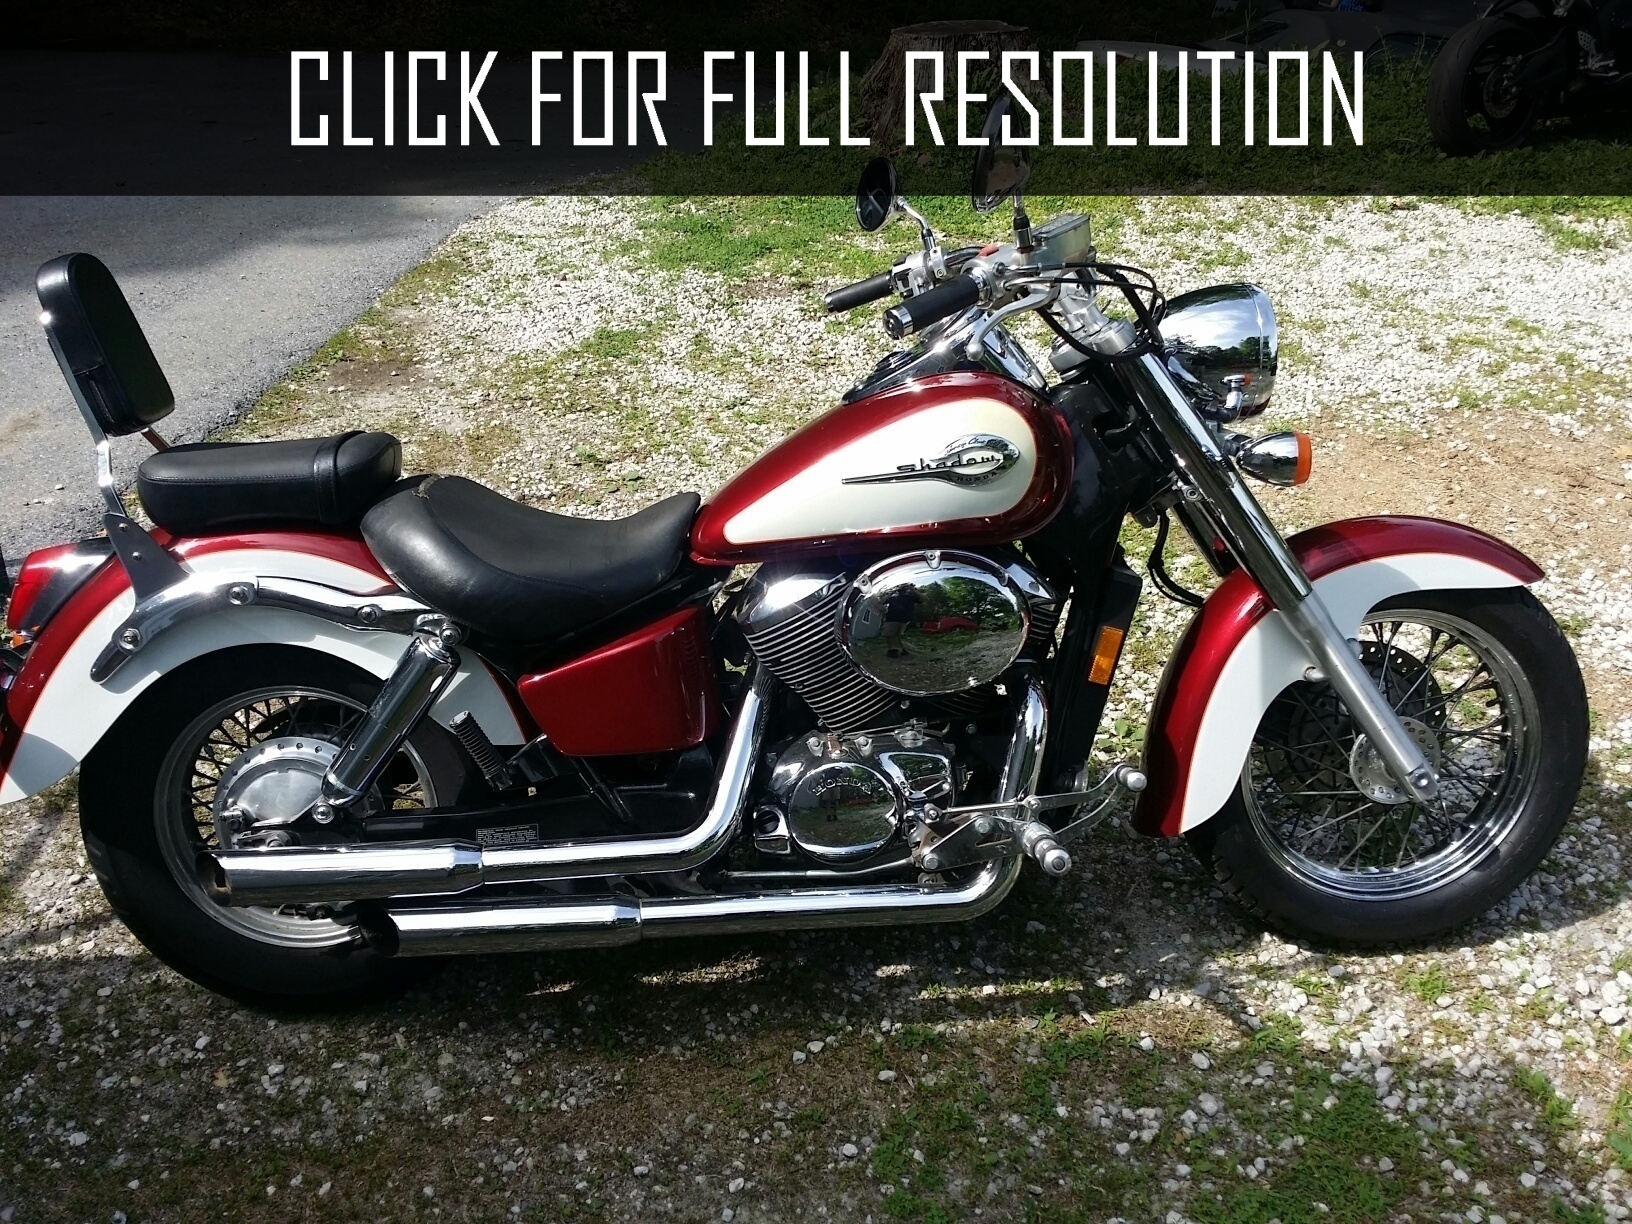 2002 Honda Shadow Ace - news, reviews, msrp, ratings with amazing images